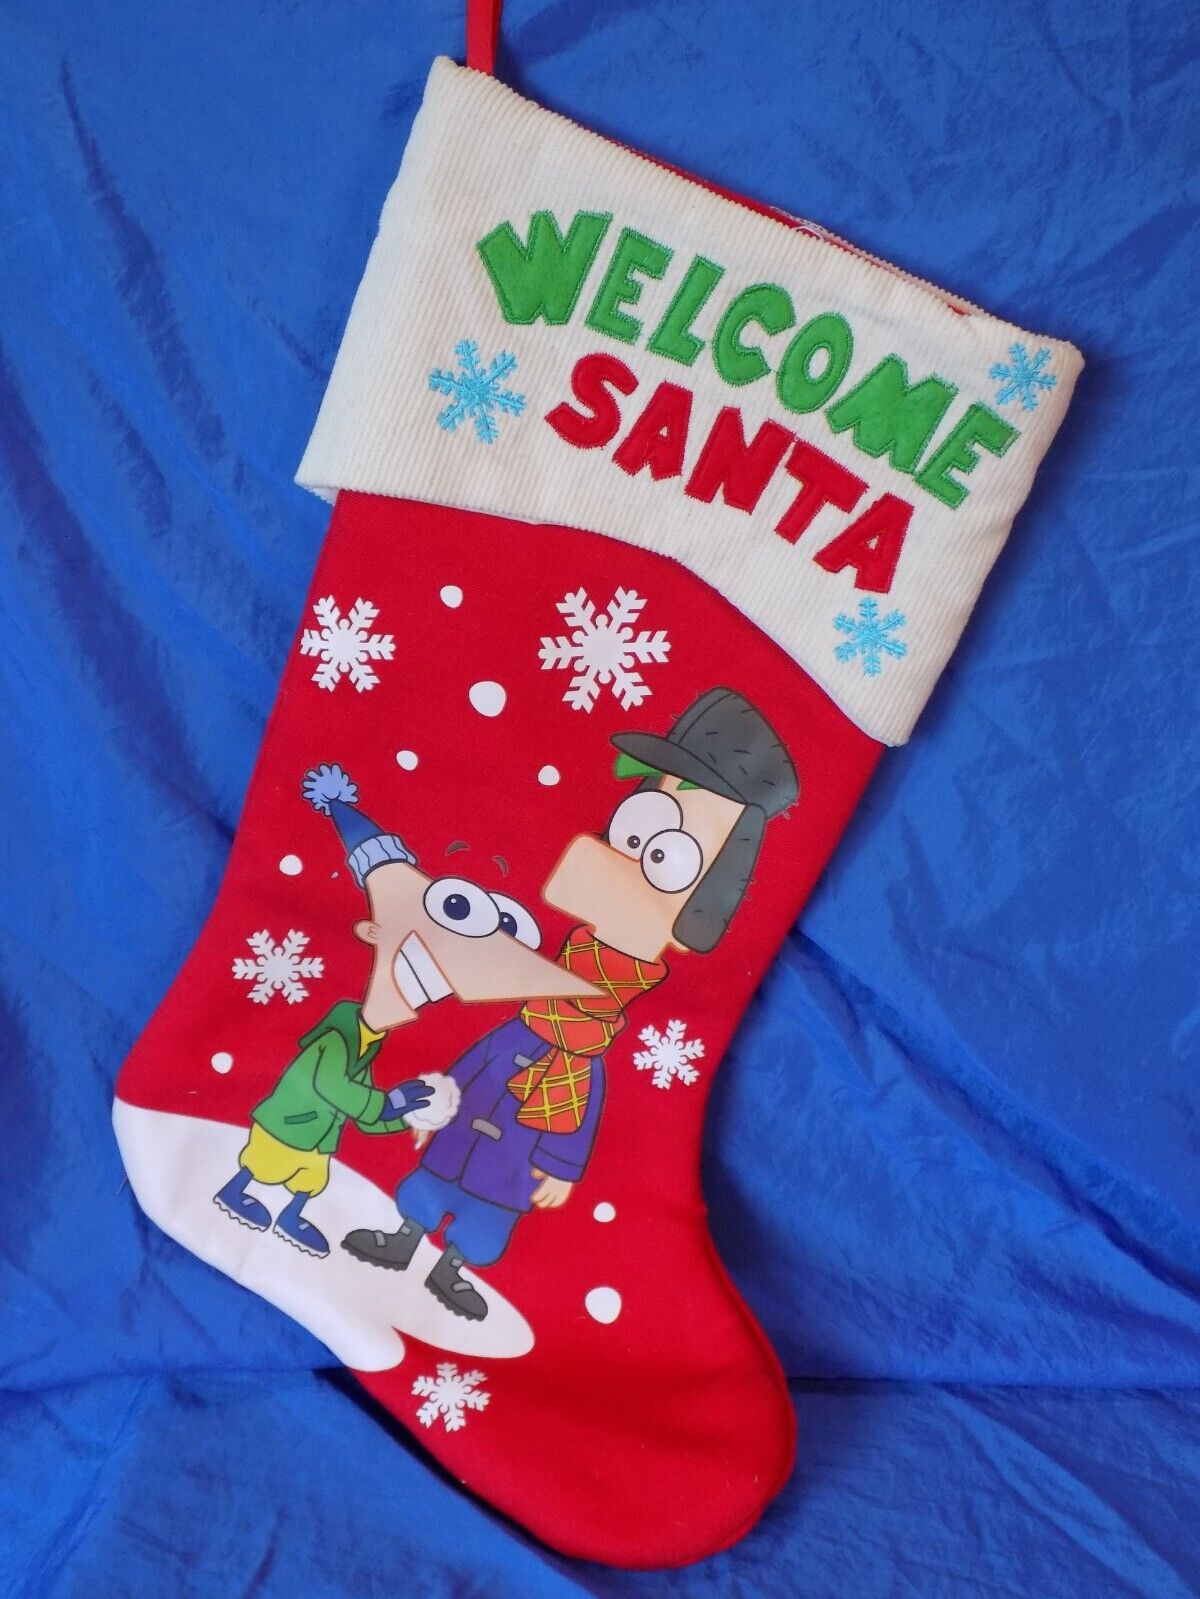 Disney\'s Phineas and Ferb Christmas Stocking WELCOME SANTA